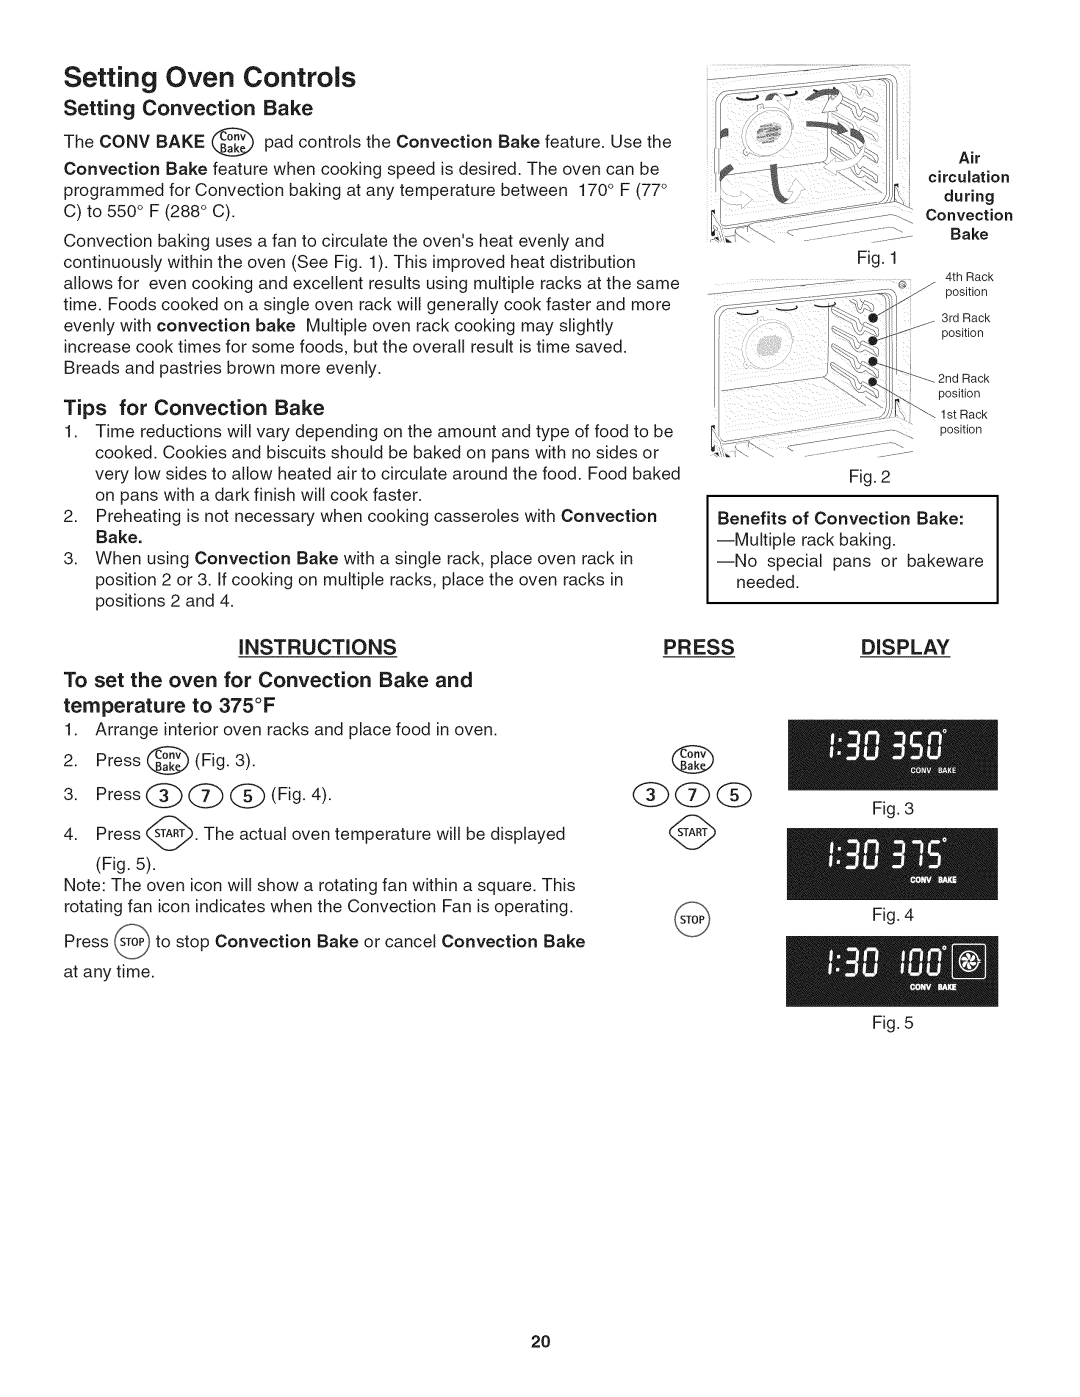 Kenmore 790.4804 Press _, Setting Oven Controls, Fig41, Setting Convection Bake, Tips for Convection Bake, Instructions 